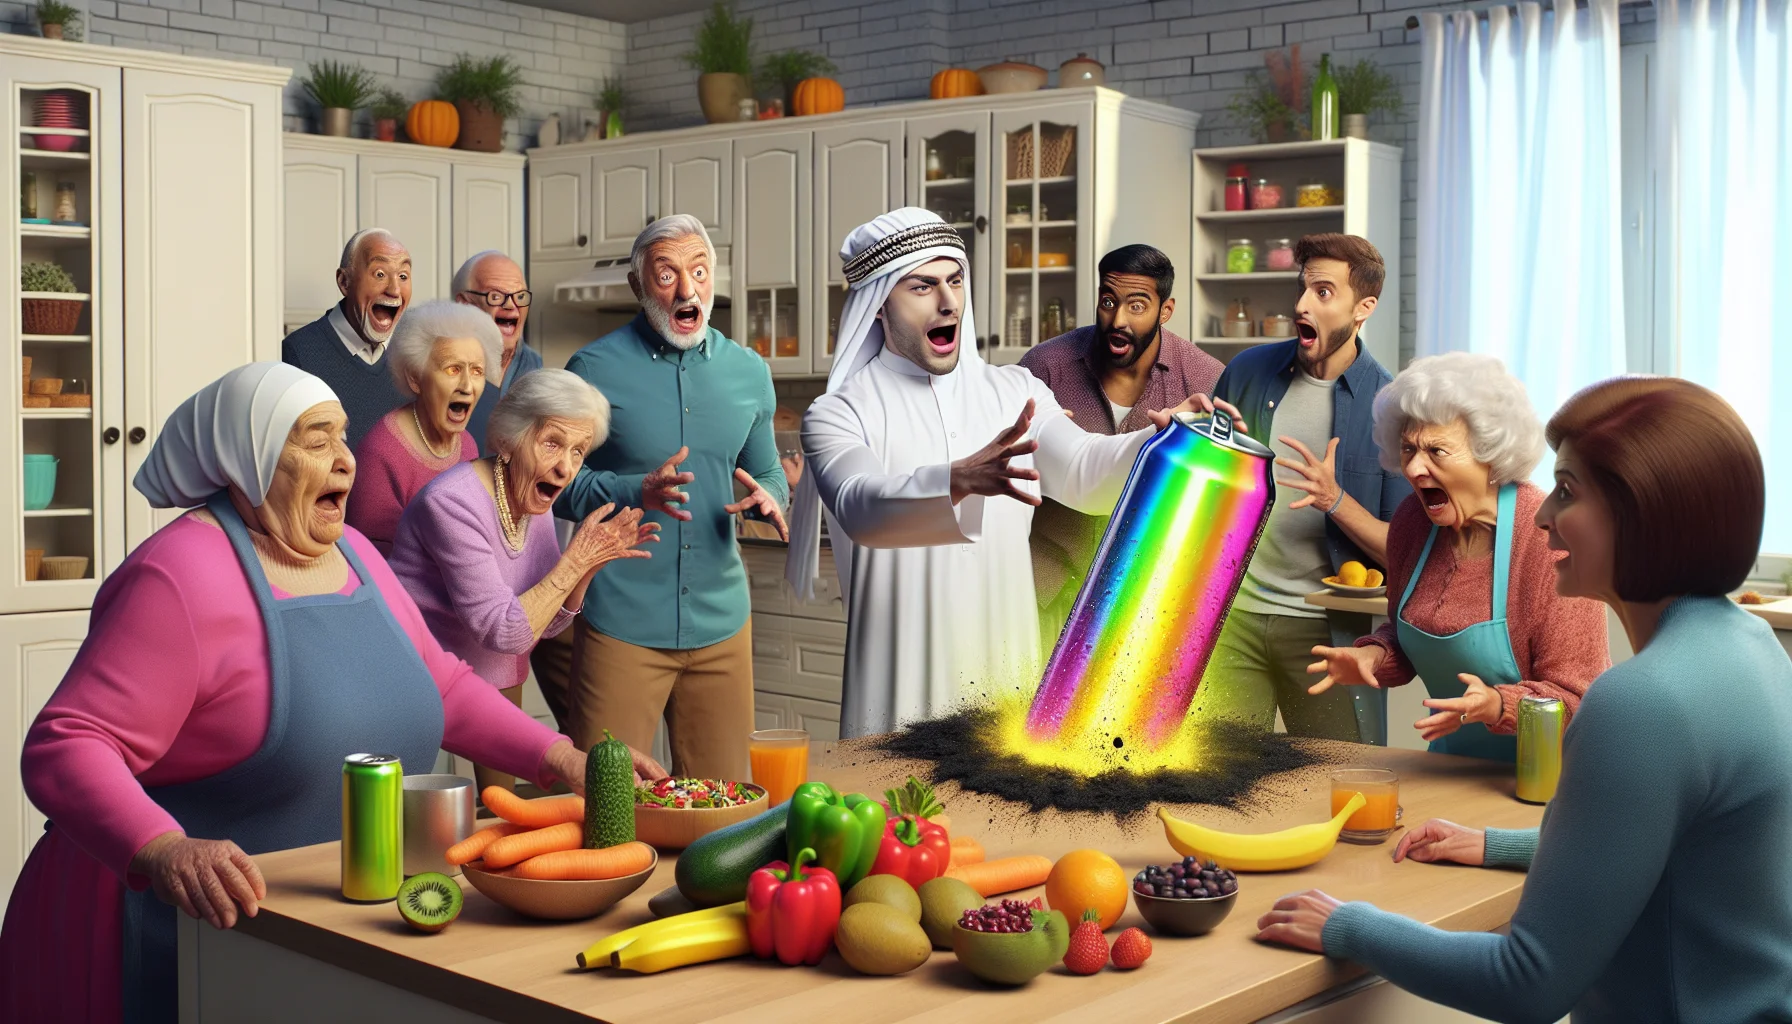 Create a hilarious, hyper-realistic image of an animated scene. The scene is set in a spacious kitchen where a group of elderly individuals of various descents, including Caucasian, South Asian, Black, and Hispanic, are humorously engrossed in a fad diet preparation. Suddenly, one of them, a Middle-Eastern woman, opens a cupboard and a brightly colored energy drink pops out, surprising everyone. The vibrant energy drink is humorously juxtaposed with the natural, healthy food ingredients scattered across the kitchen. The scenario emphasizes the irony of instant energy versus natural sustained nourishment, thus bringing out the humor in the most unexpected scene.